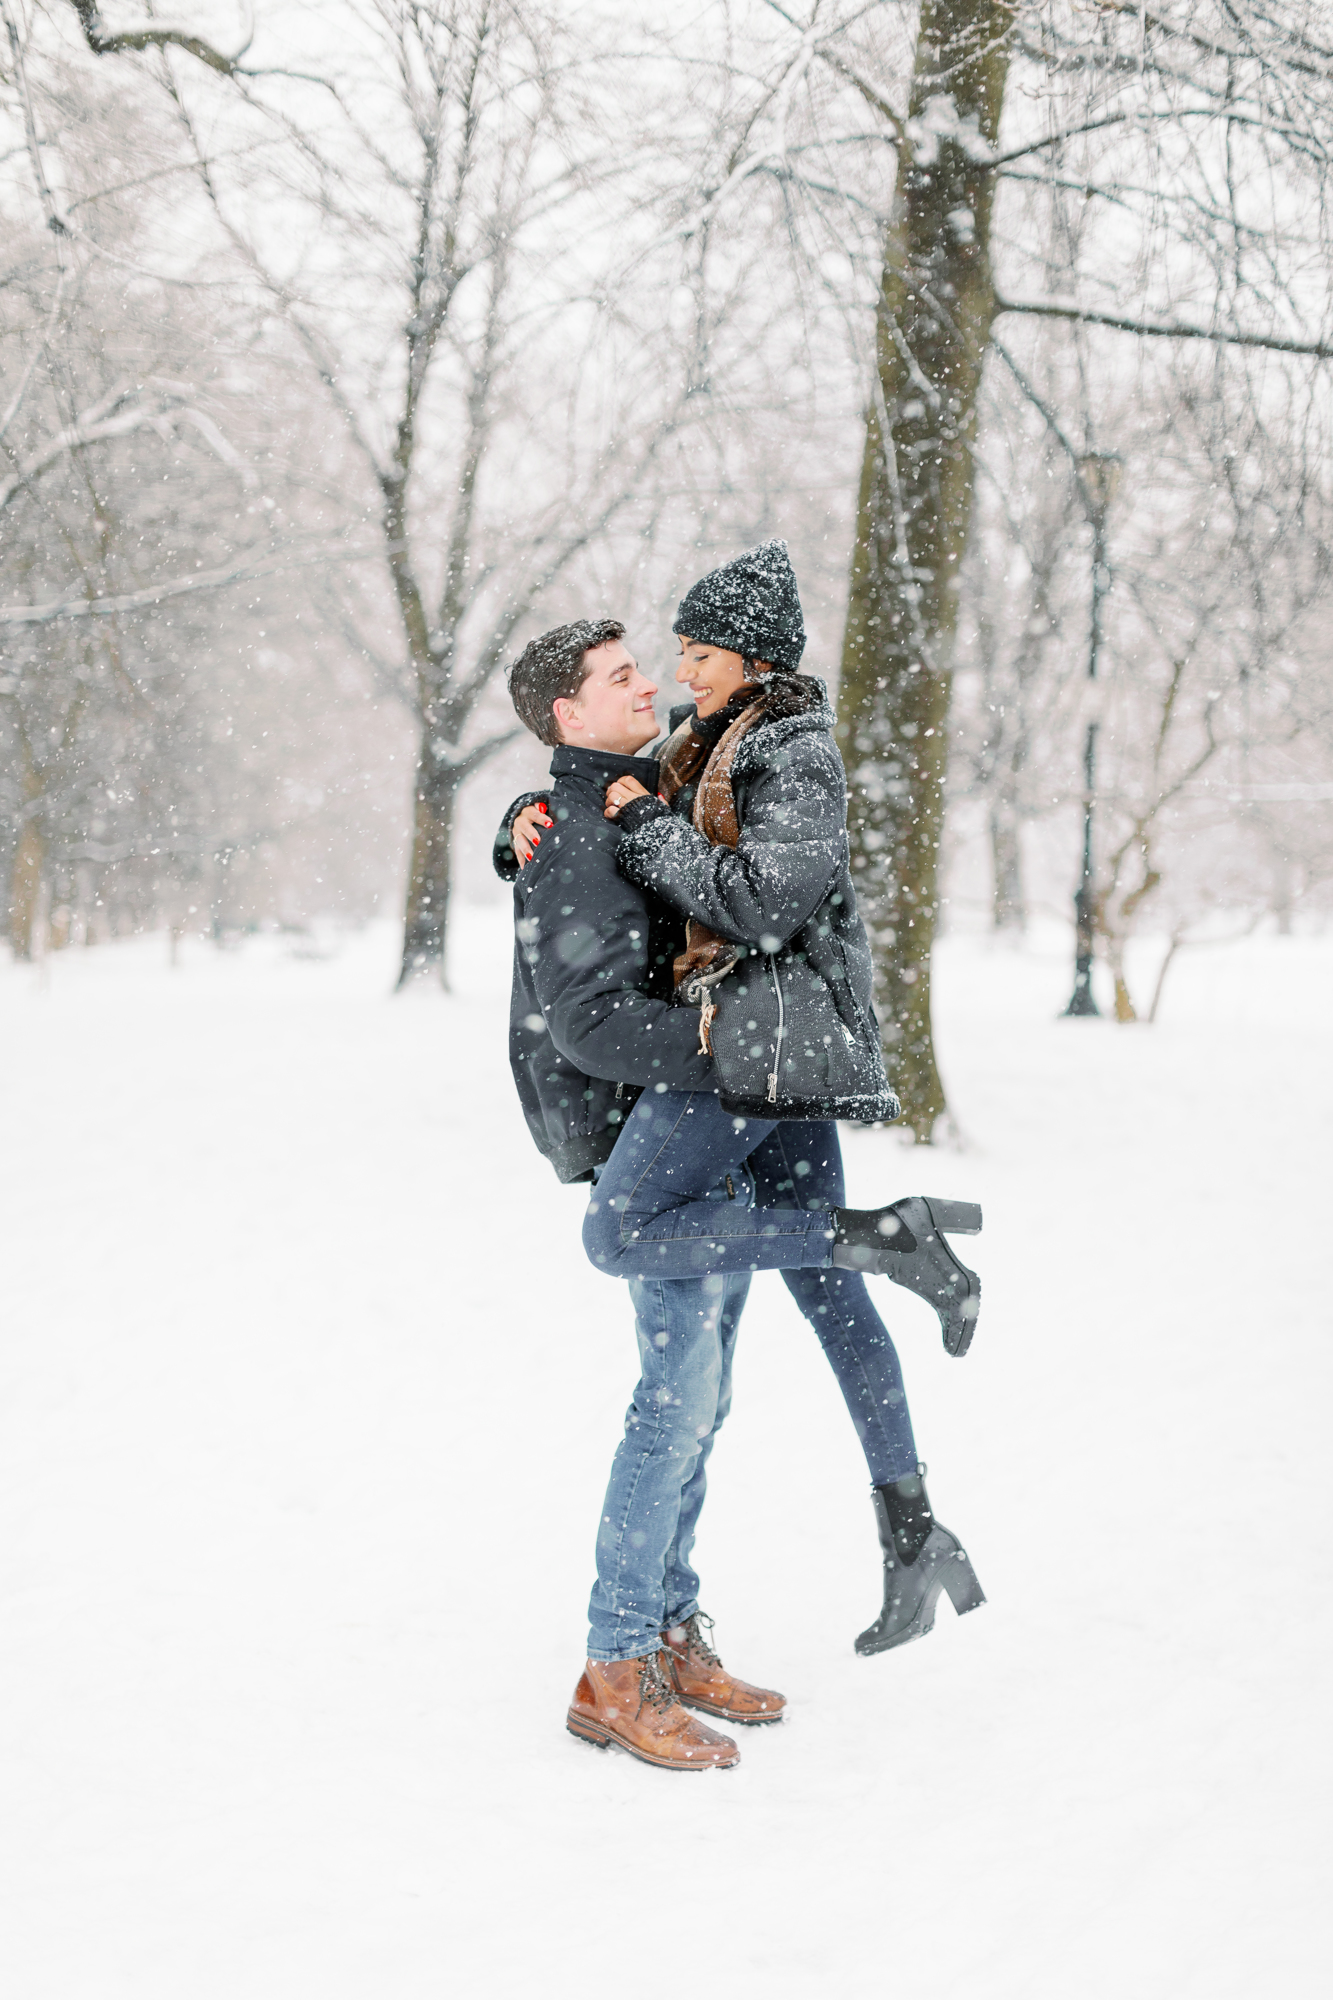 Charming Winter Engagement Photos in Snowy Prospect Park